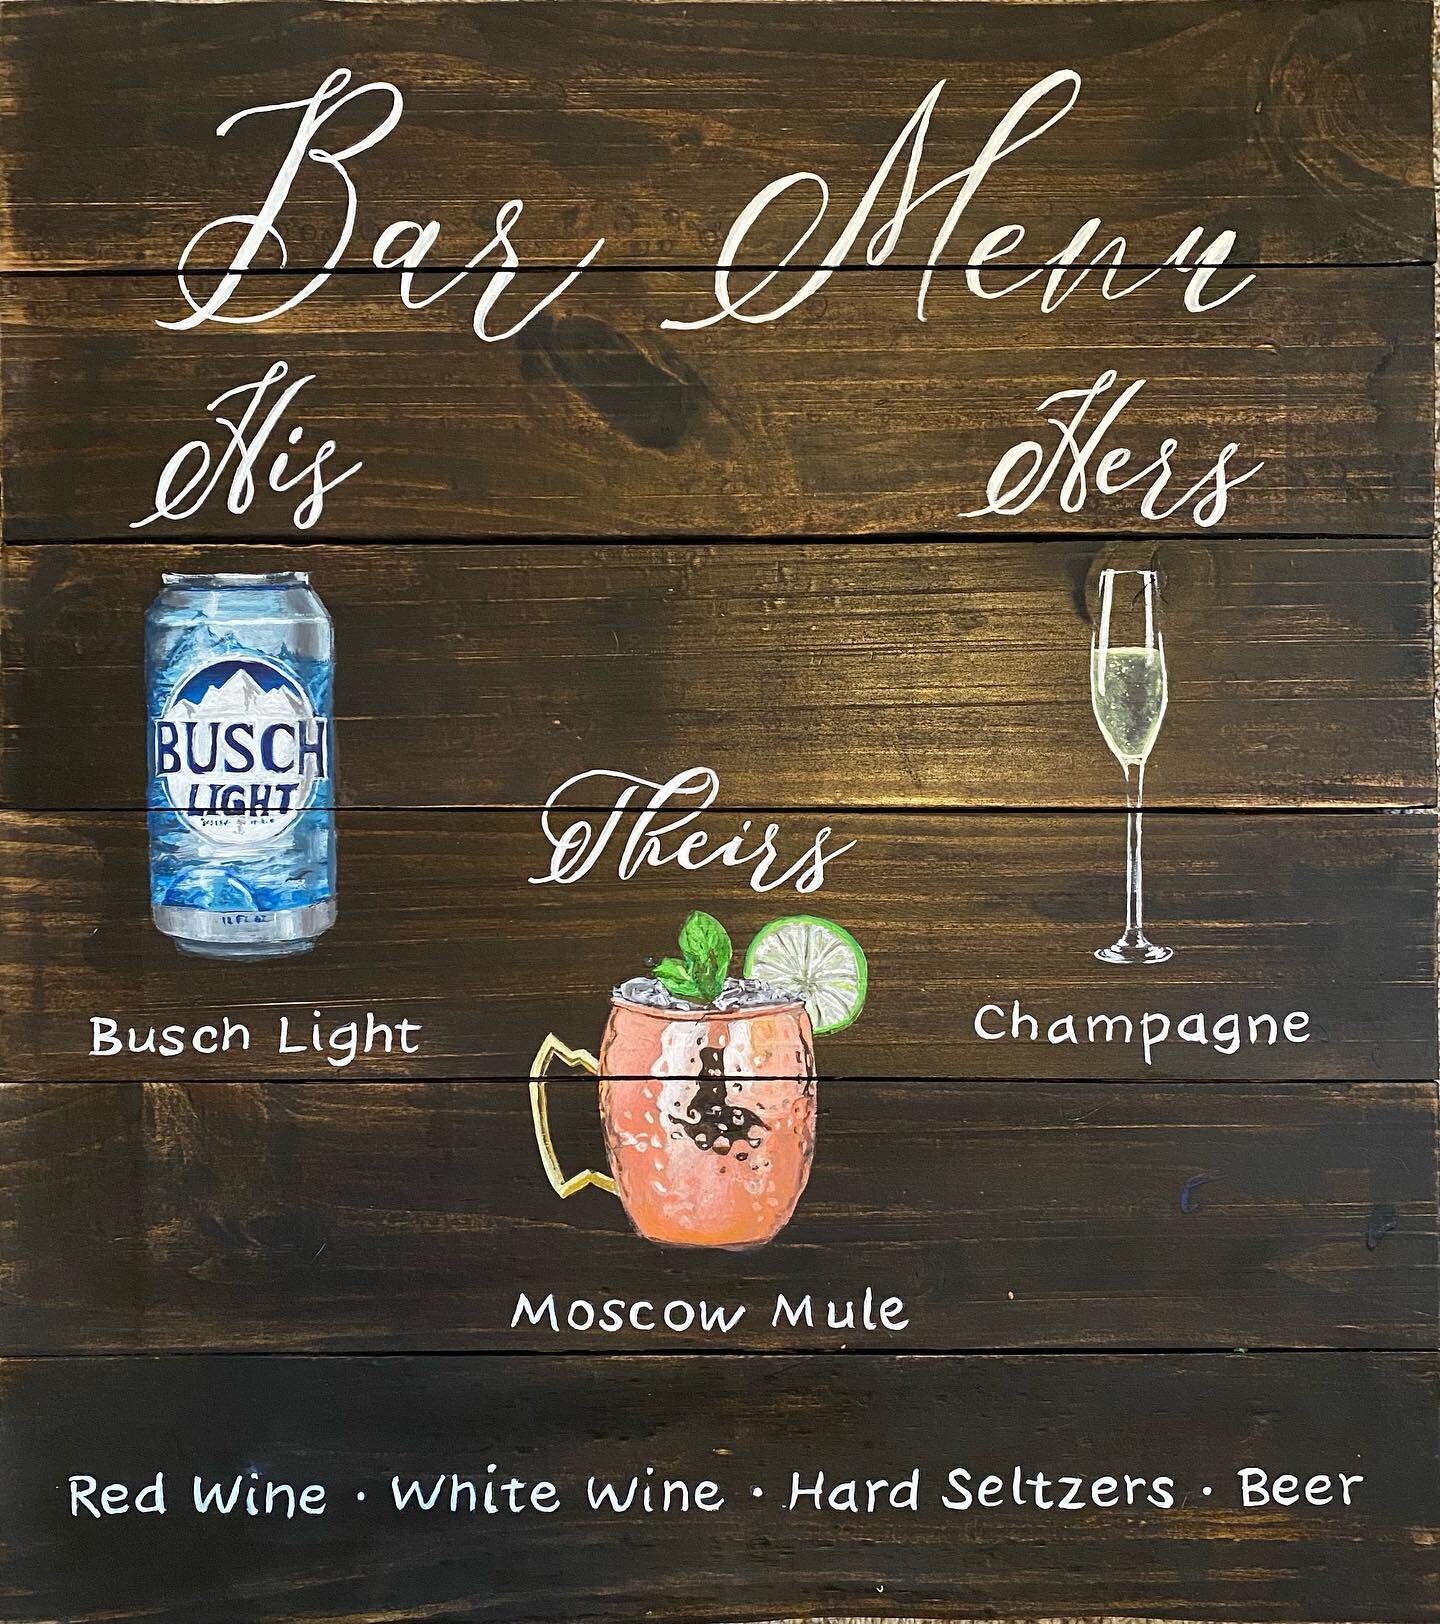 Here&rsquo;s the Bar Menu sign I painted for the lovely Wood wedding. Apologies for any sudden cravings for Busch Light you might be  experiencing 😜
#cheers